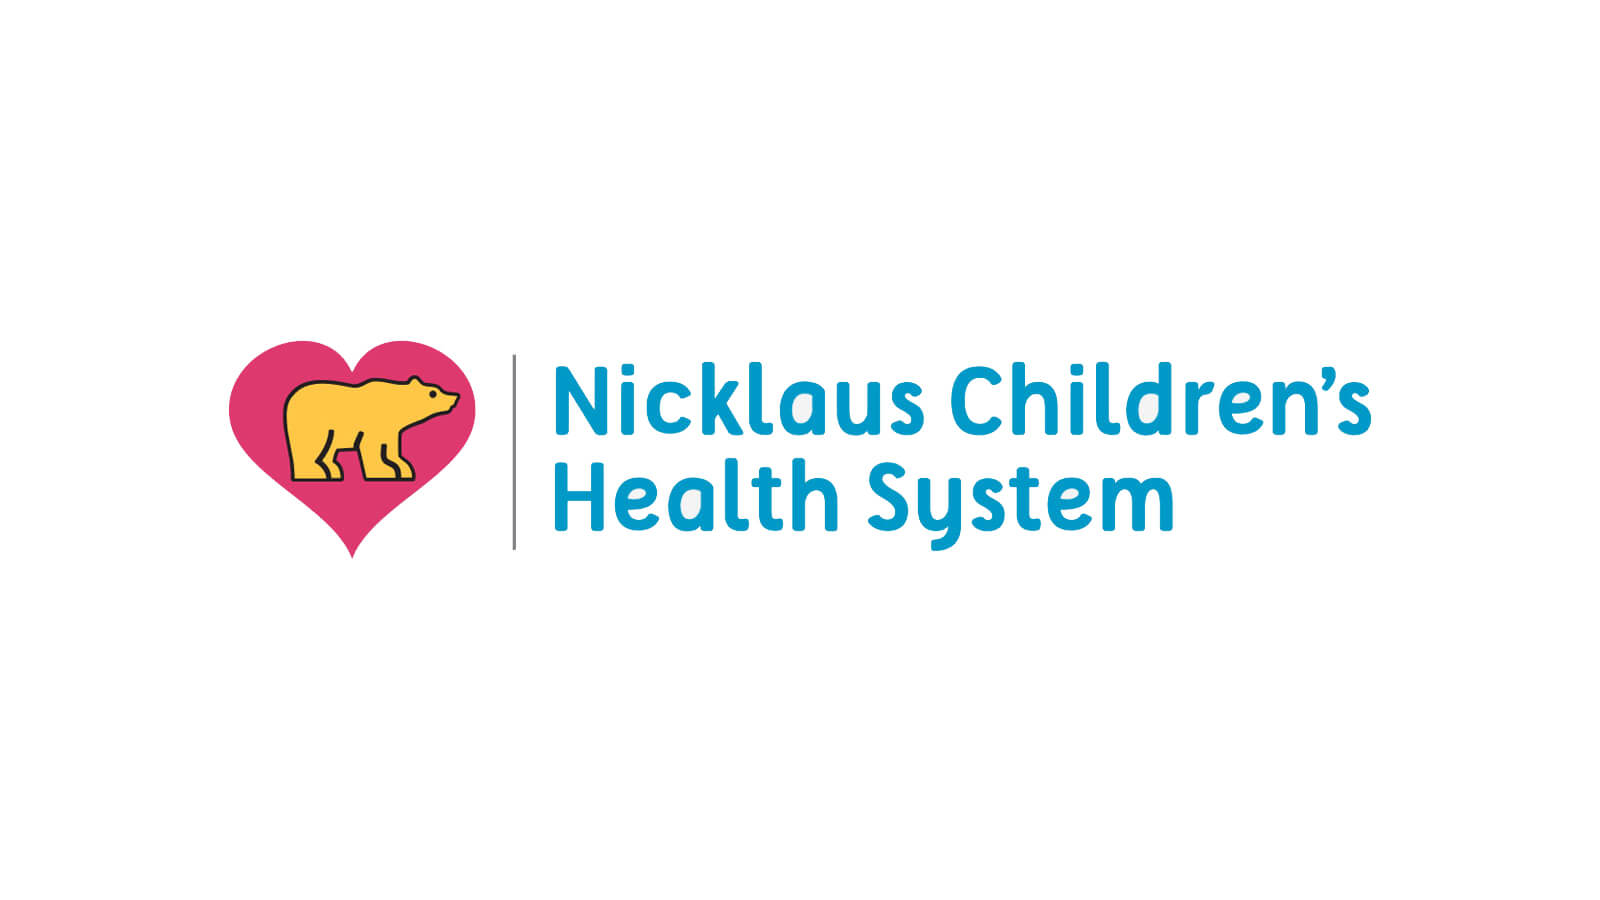 Search Jobs and Careers at Nicklaus Children's Health System